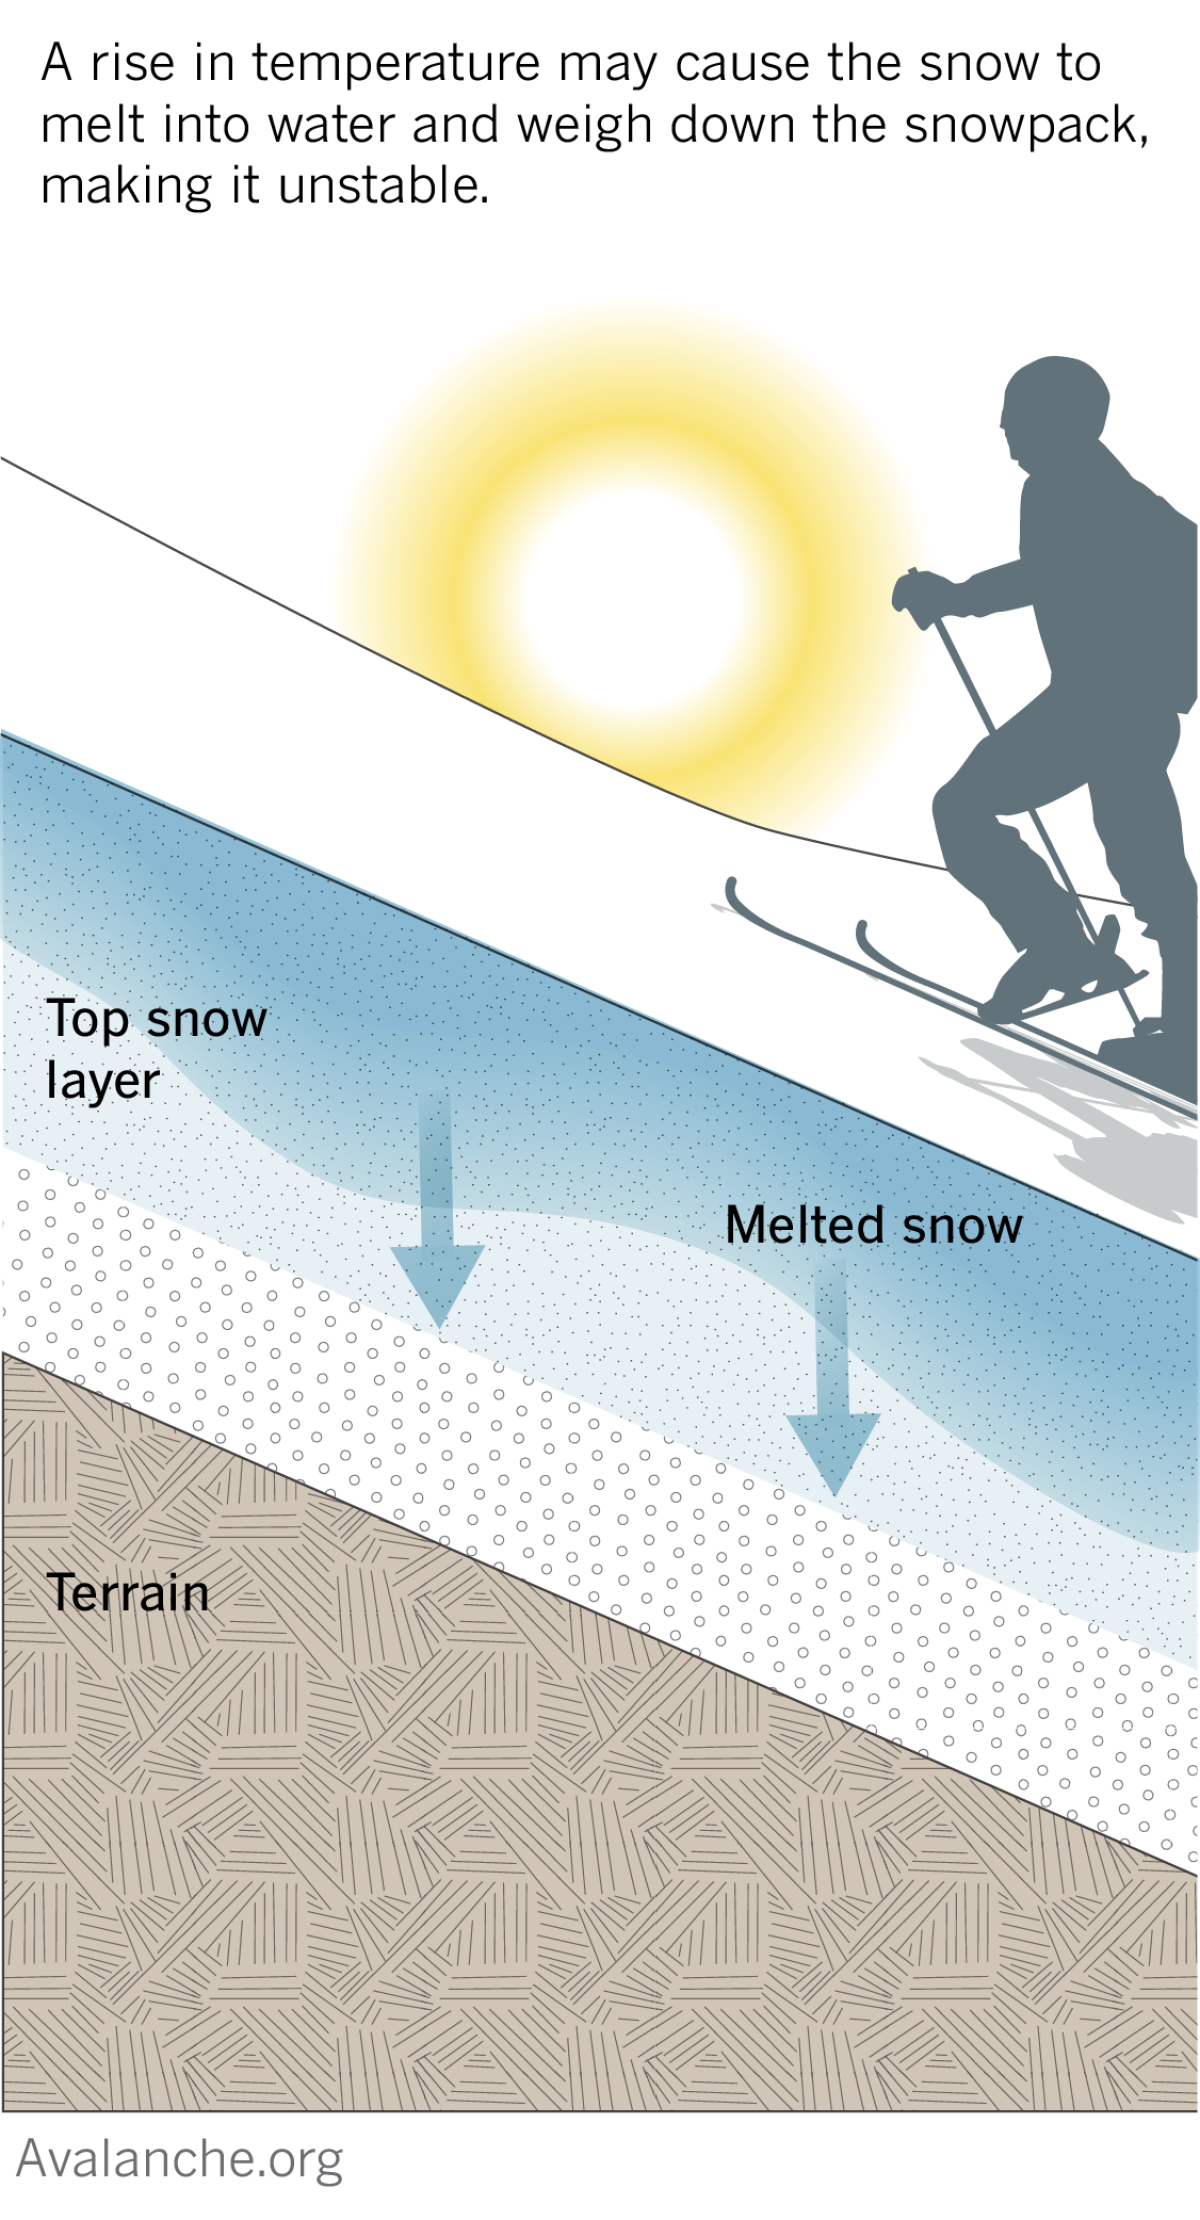 Diagram shows a rise in temperature may cause the snow to melt into water and weigh down the snowpack, making it unstable.